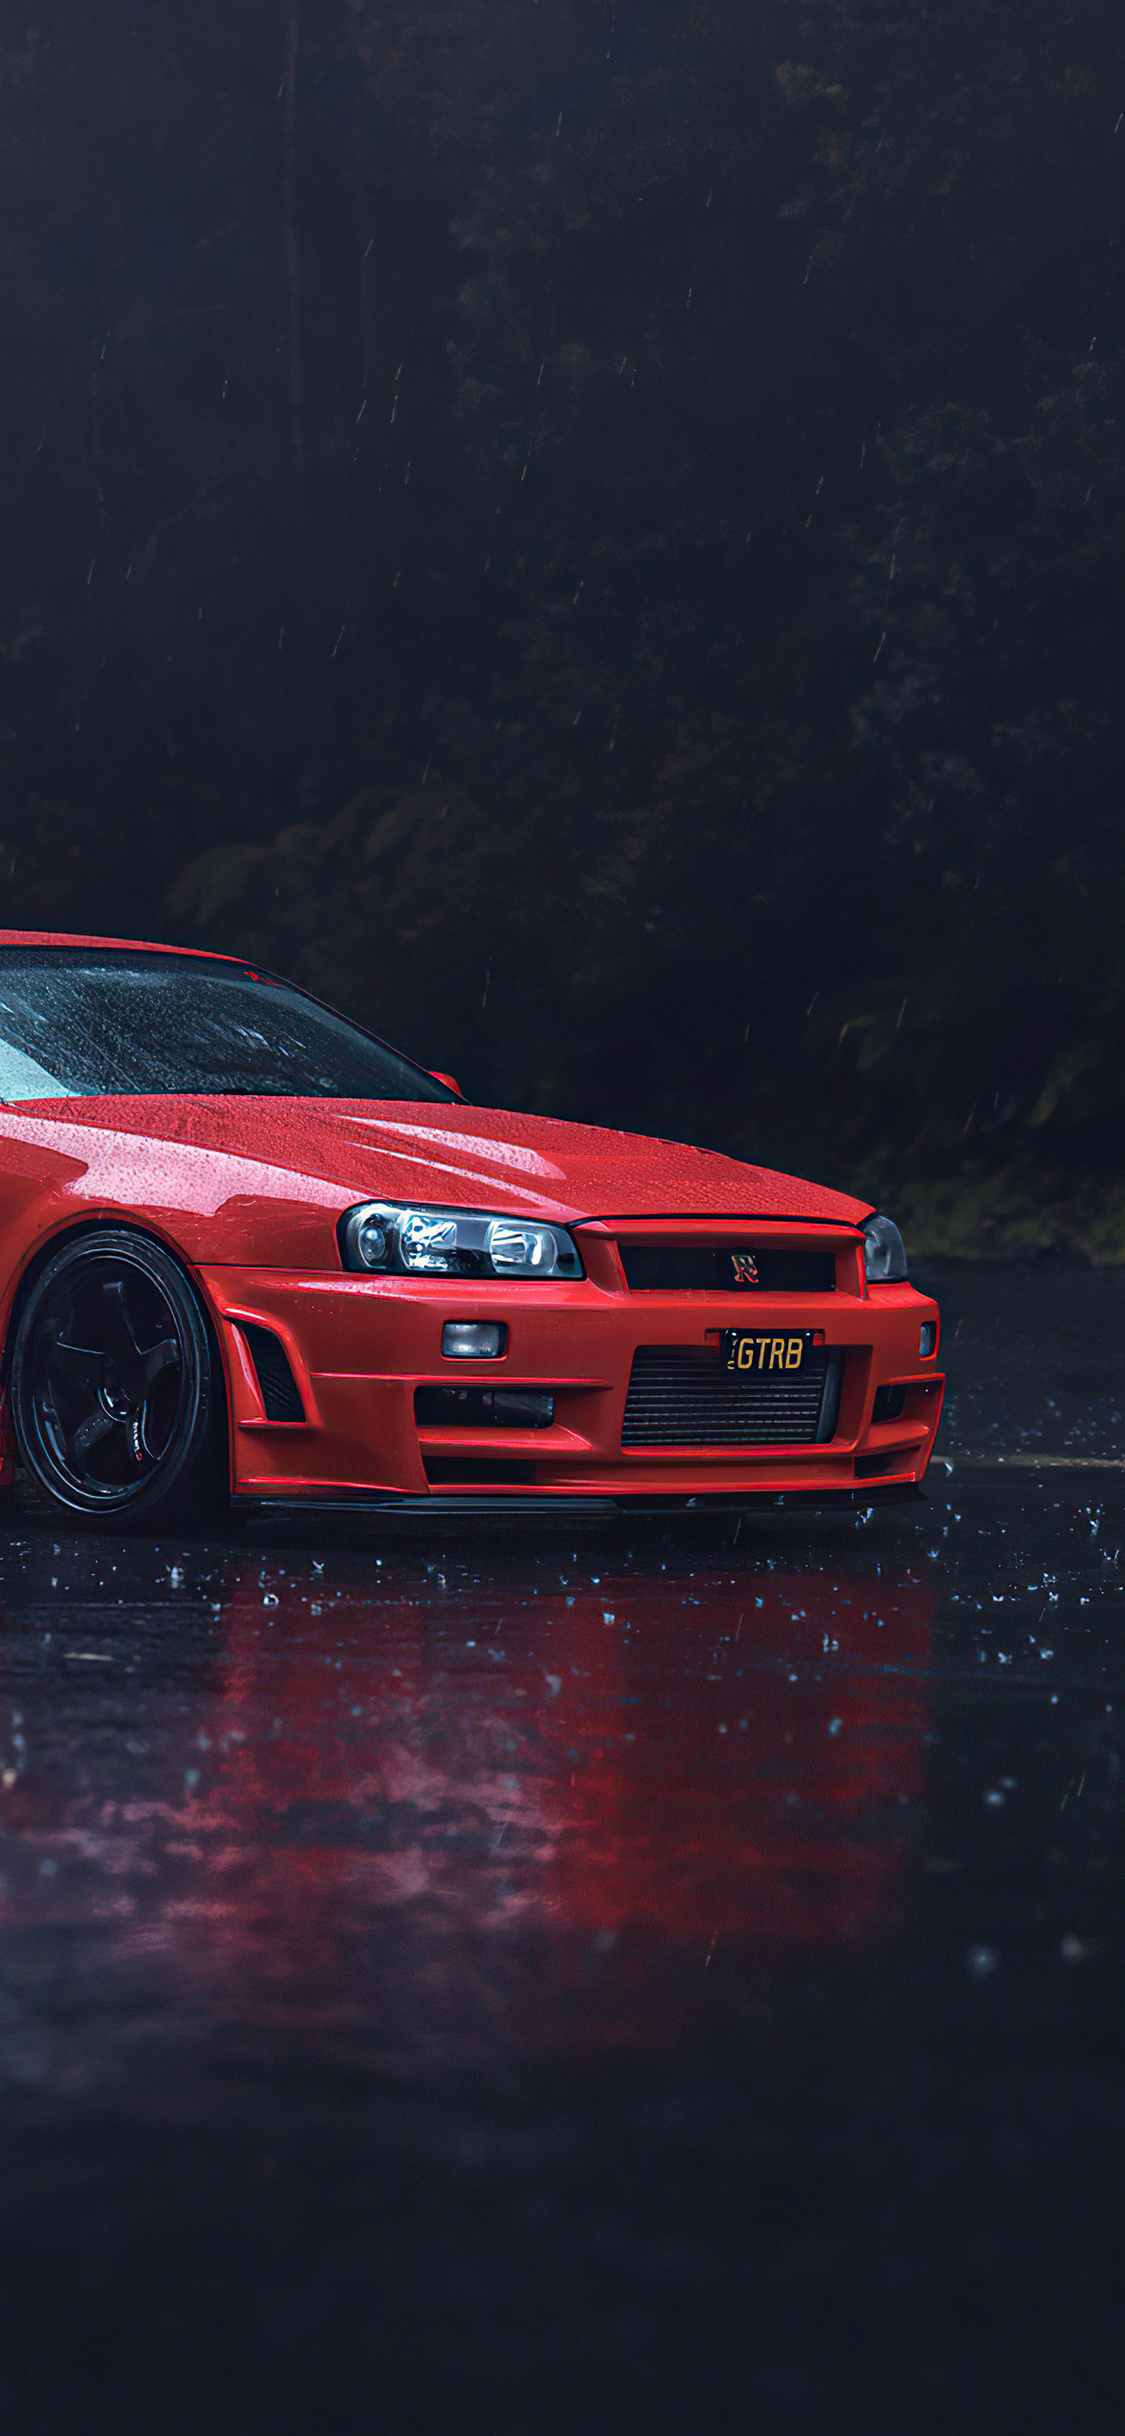 R34 GTR + the good looking TC2 moon = Nice and clean phone wallpaper :  r/The_Crew